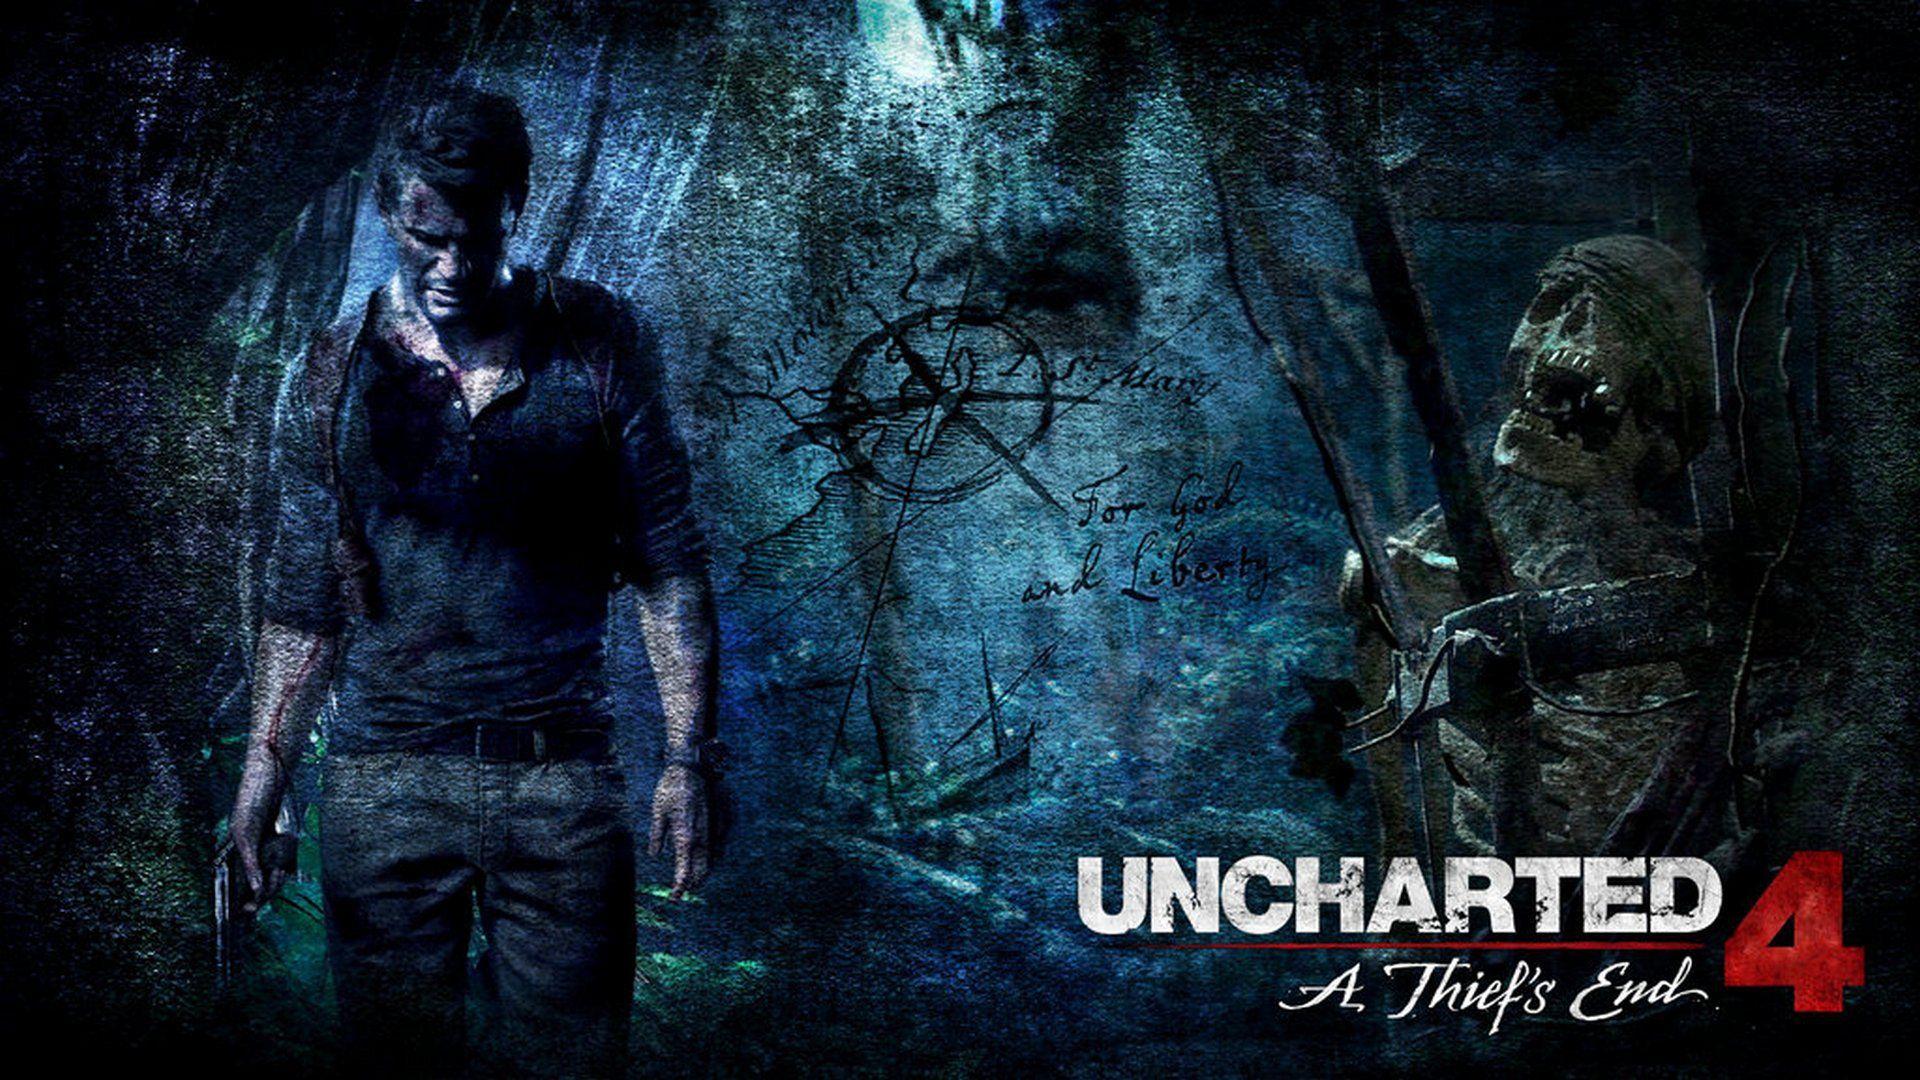 Uncharted 4: A Thief's End HD Wallpaper 12 X 1080